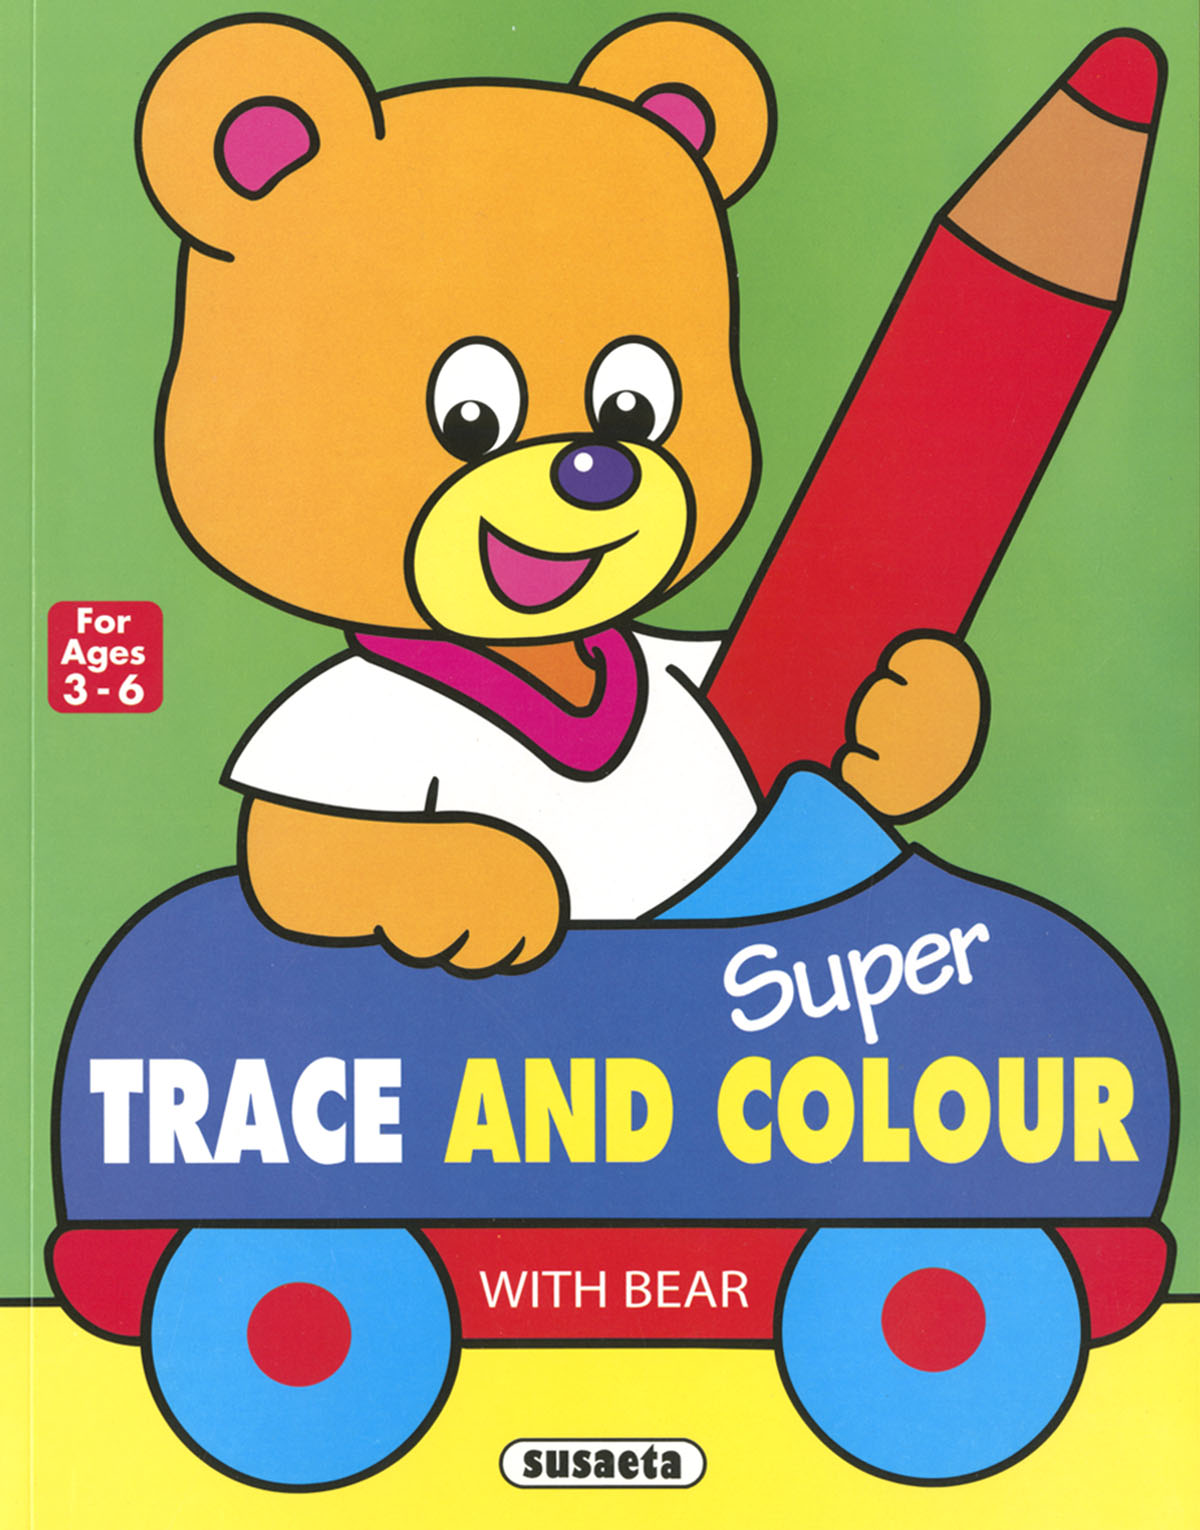 Super trace and colour with bear